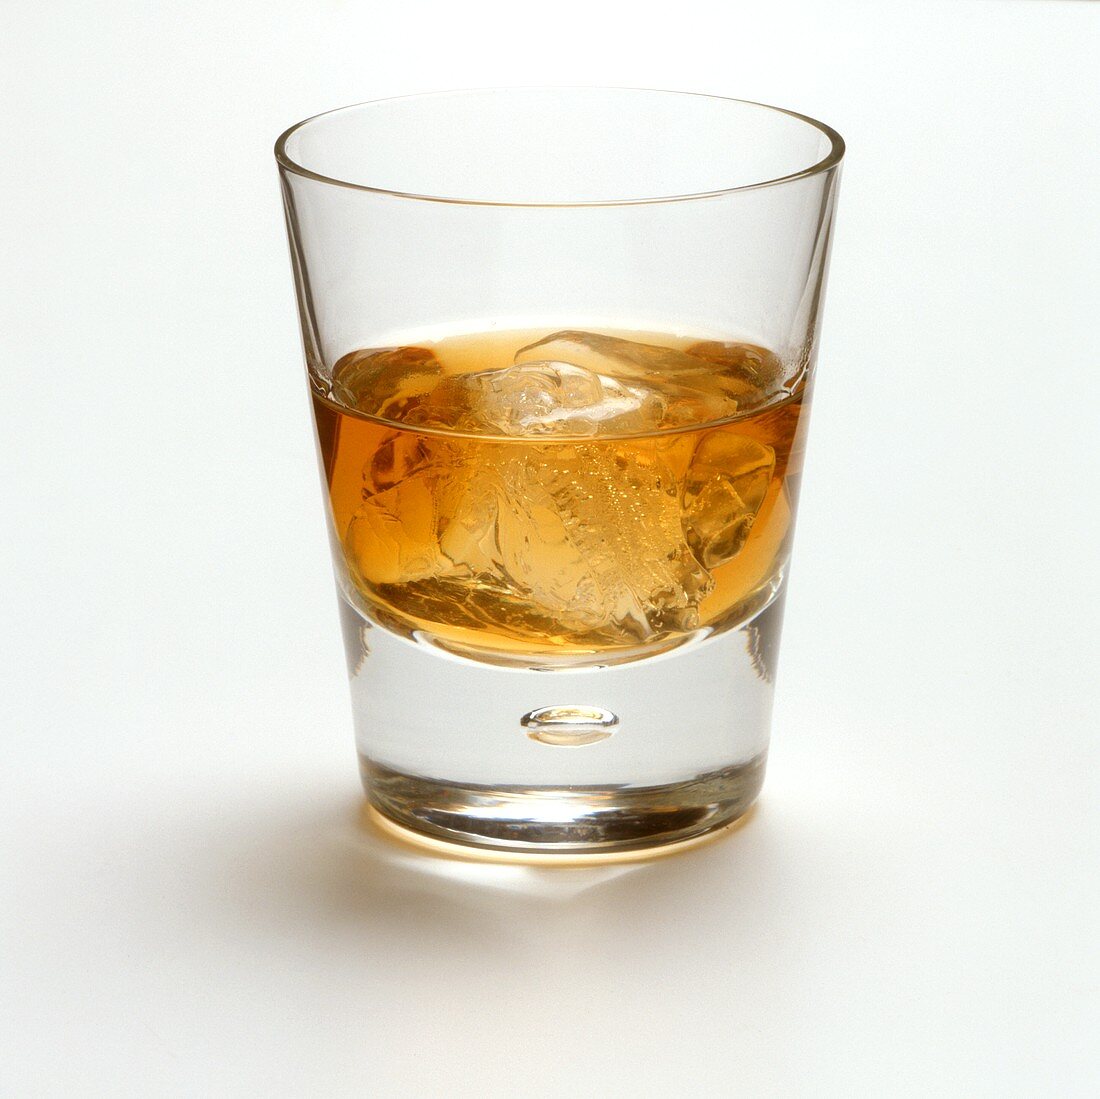 Whisky with ice cubes in glass